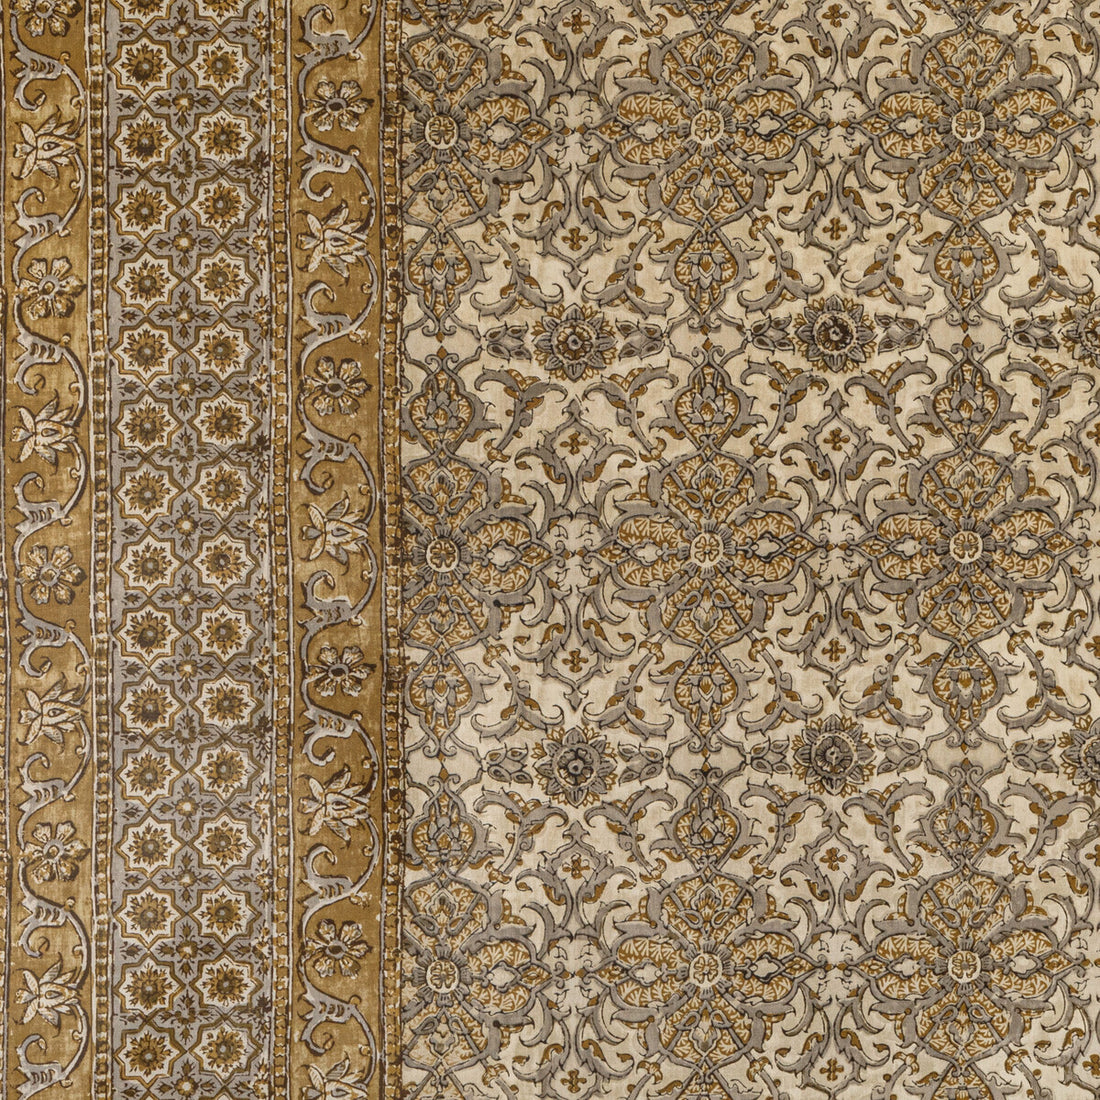 Palmer Print fabric in gold color - pattern 2022117.416.0 - by Lee Jofa in the Bunny Williams Arcadia collection